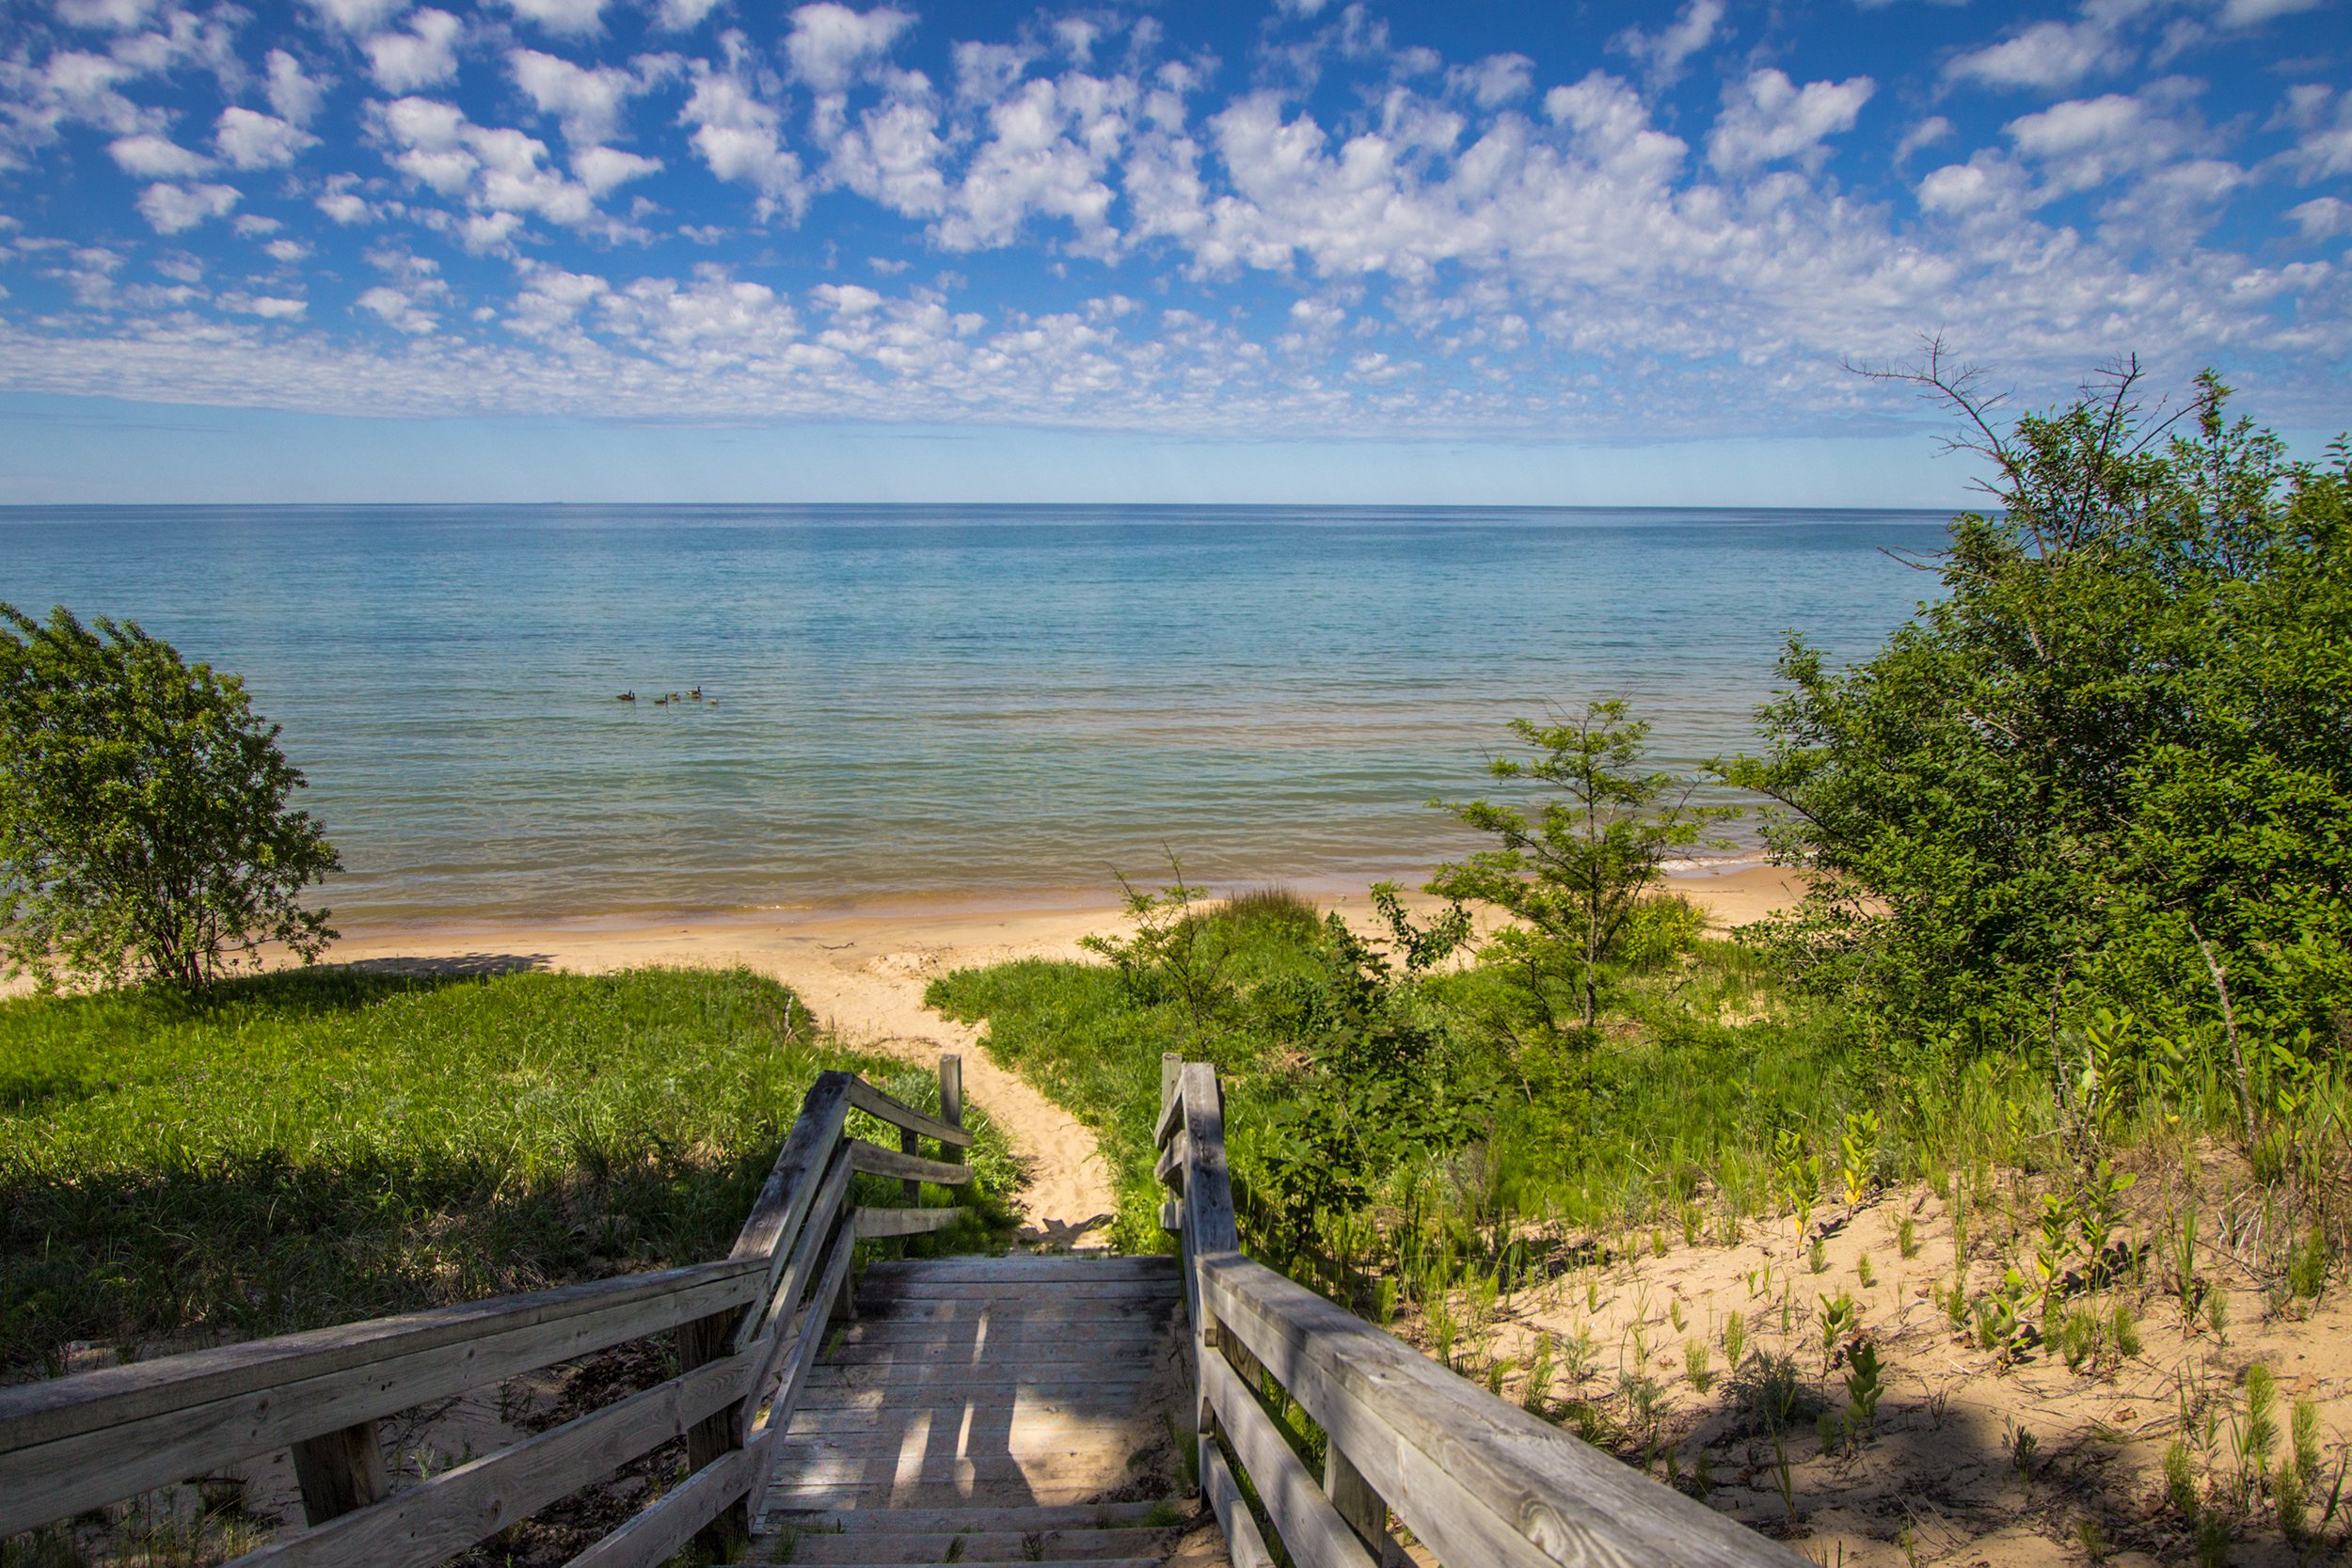 <p>Home to five of America's top 50 bass lakes, four of the five Great Lakes, and arguably the best fly fishing in the country, Michigan just might be the best state in America for anglers. Seawall fishing on <a href="https://www.michigan.gov/dnr/0,4570,7-350-79119_79146_81198-469743--,00.html">southern Lake Michigan</a>, however, is arguably the best experience you'll have with a rod and reel in the state. There you'll be able to catch your fill of Chinook salmon, brown trout, steelhead, freshwater drum, coho salmon, perch, and more.</p>